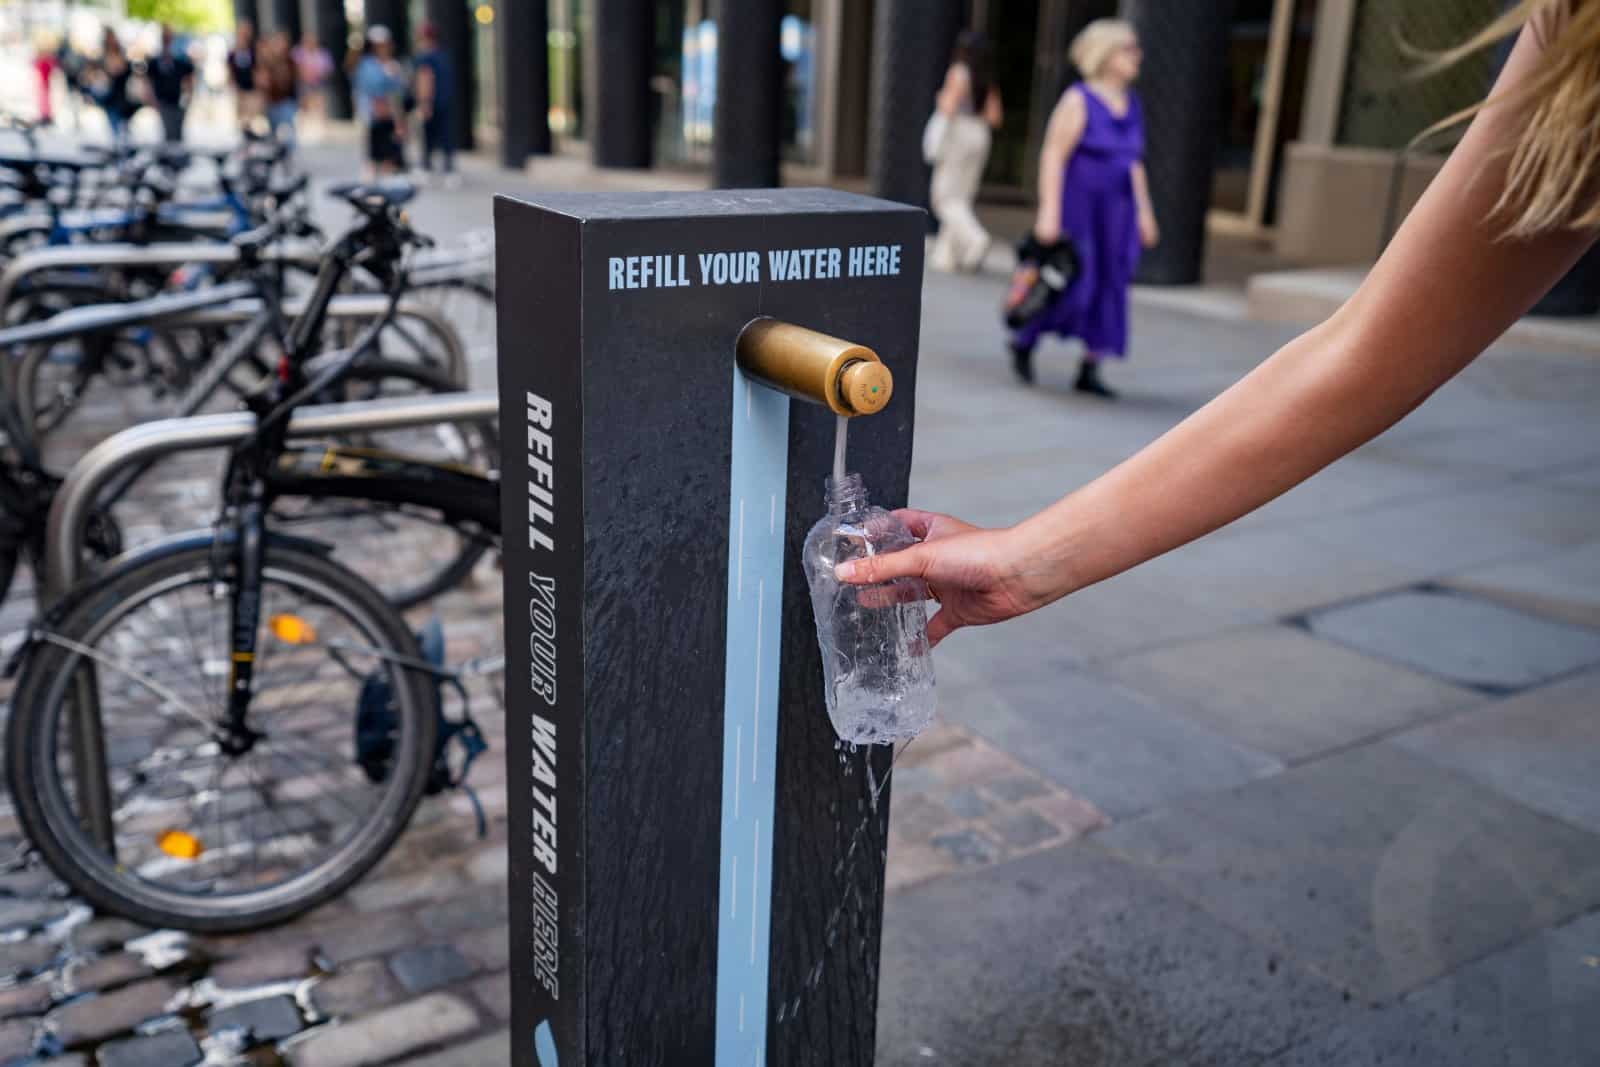 <p><span>The Water-Refill Stations app is a game-changer for reducing single-use plastic during your travels. It helps you locate nearby water refill stations, allowing you to refill your reusable bottle easily.</span></p> <p><span>This is particularly useful in destinations where tap water isn’t potable. By using this app, you contribute to lessening plastic pollution and promoting a culture of sustainability in the places you visit.</span></p> <p><b>Insider’s Tip: </b><span>Carry a collapsible water bottle to save space in your luggage and refill it at these stations.</span></p>